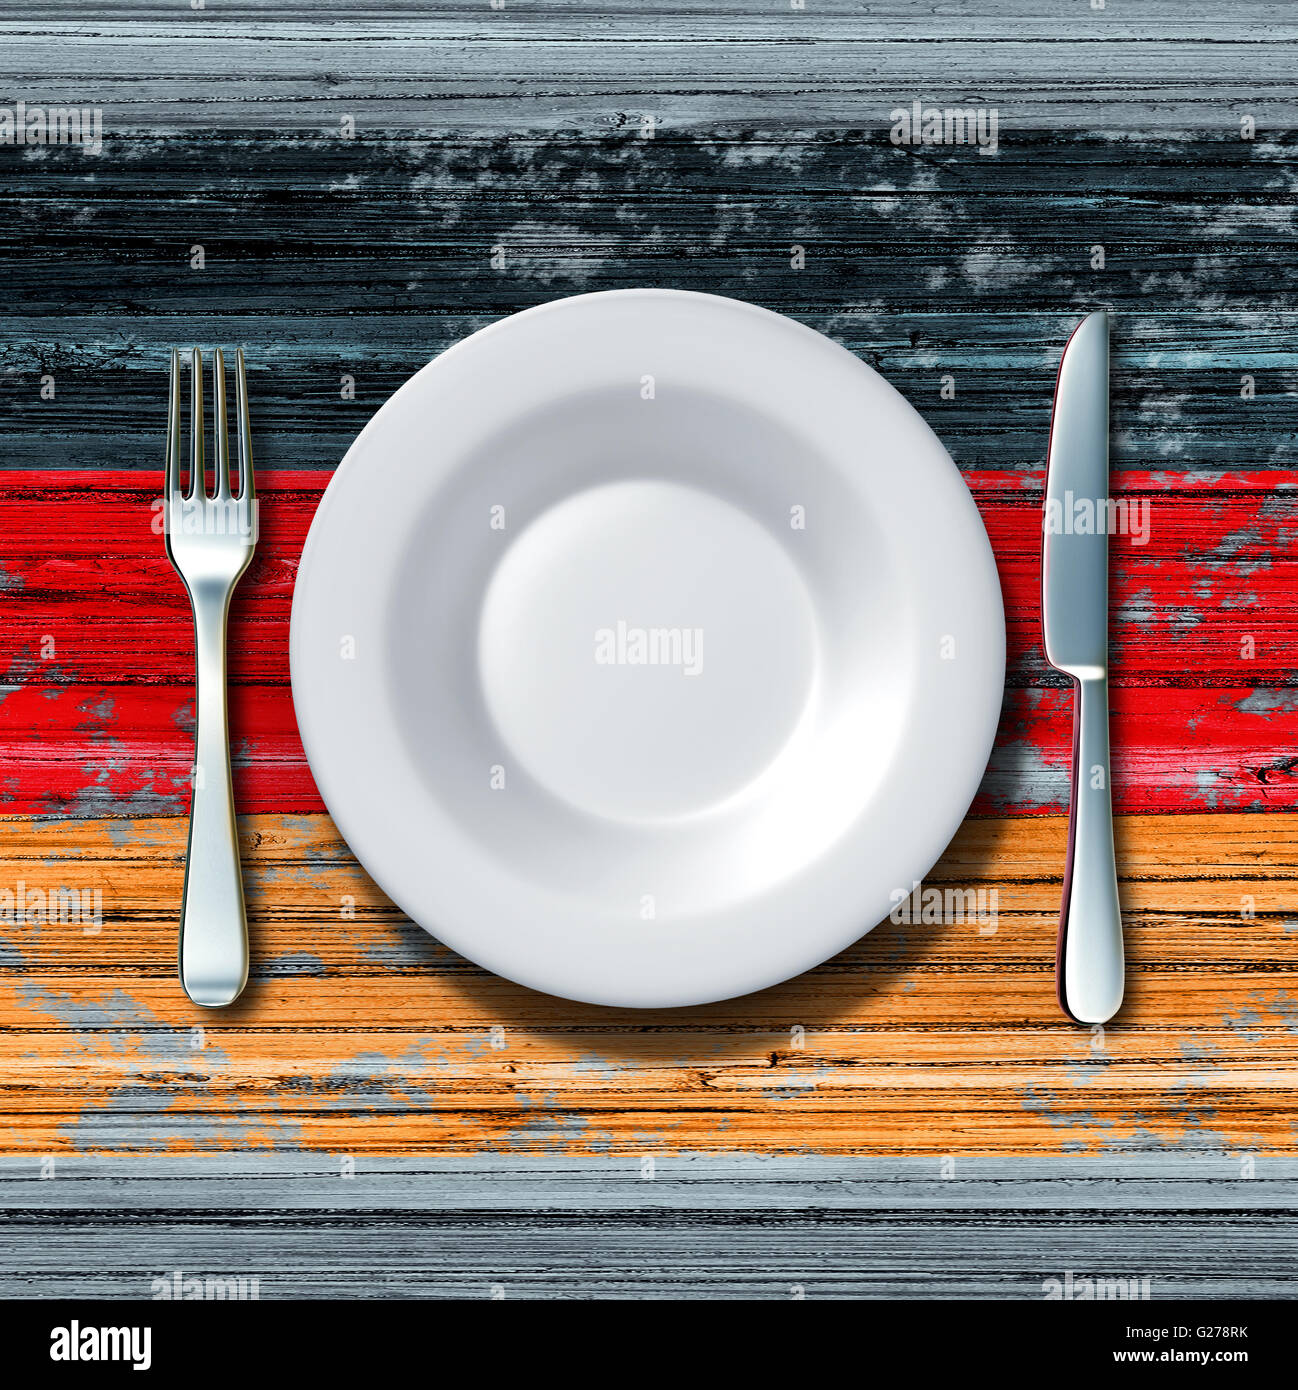 German cuisine food concept as a place setting with knife and fork on an old rustic wood table with an icon flag of Germany as an icon of traditional eating in Berlin with 3D illustration elements. Stock Photo